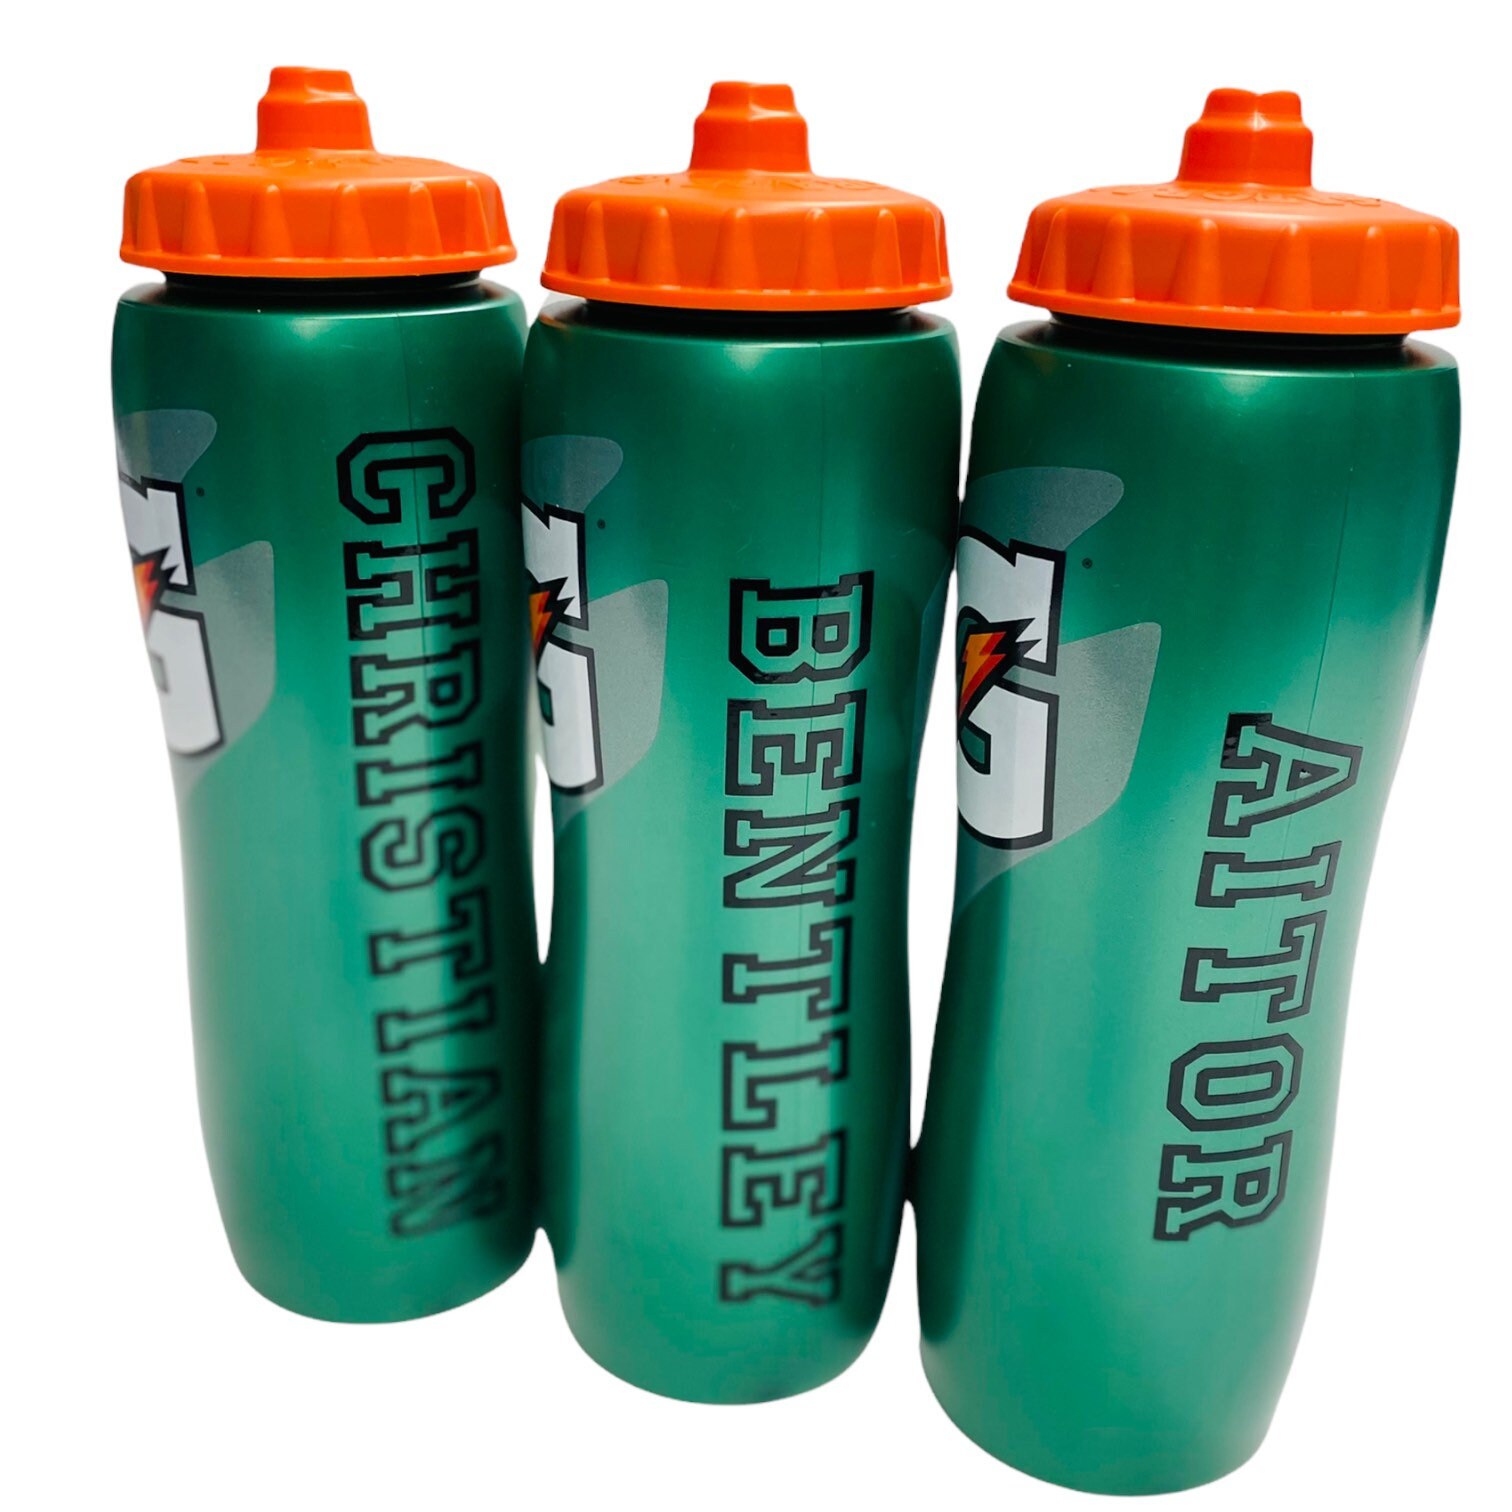 Gatorade T-shirt, Water Bottle and Drawstring Bag - clothing & accessories  - by owner - apparel sale - craigslist